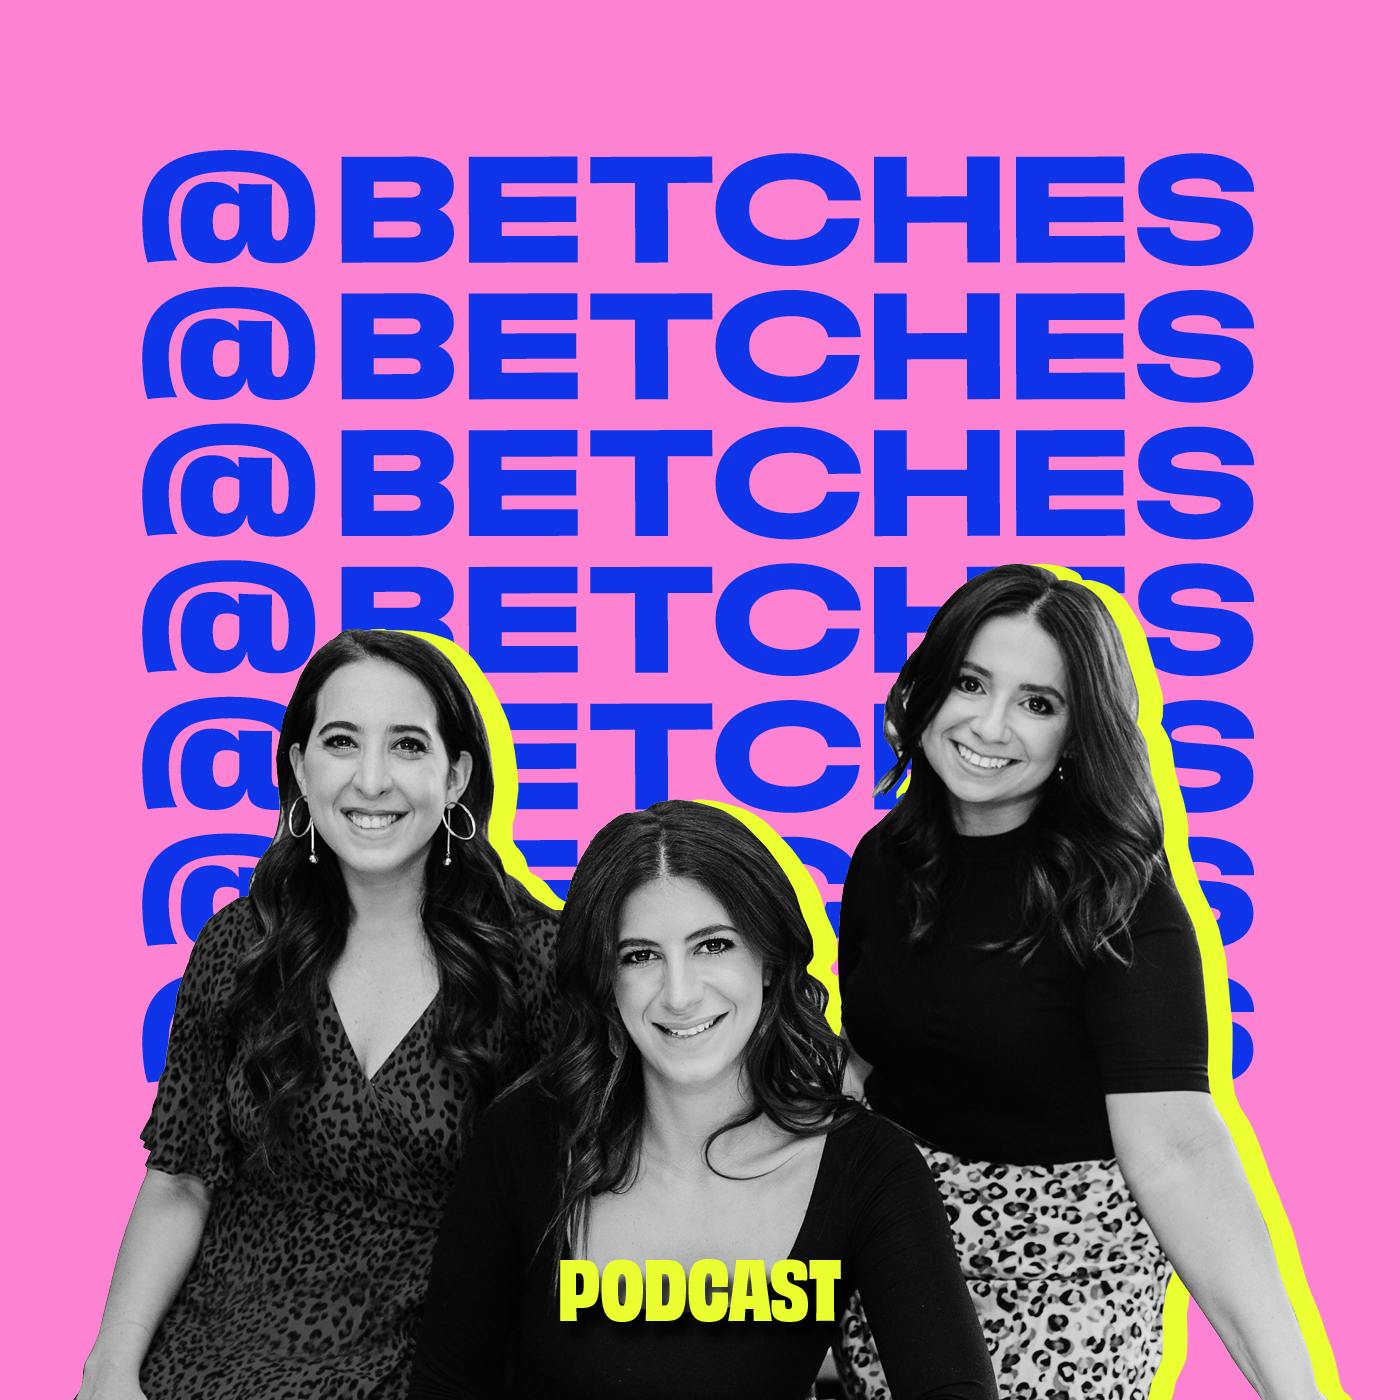 Ariana Grande Naked Lesbian On The Beach - Betches - Podcast Addict